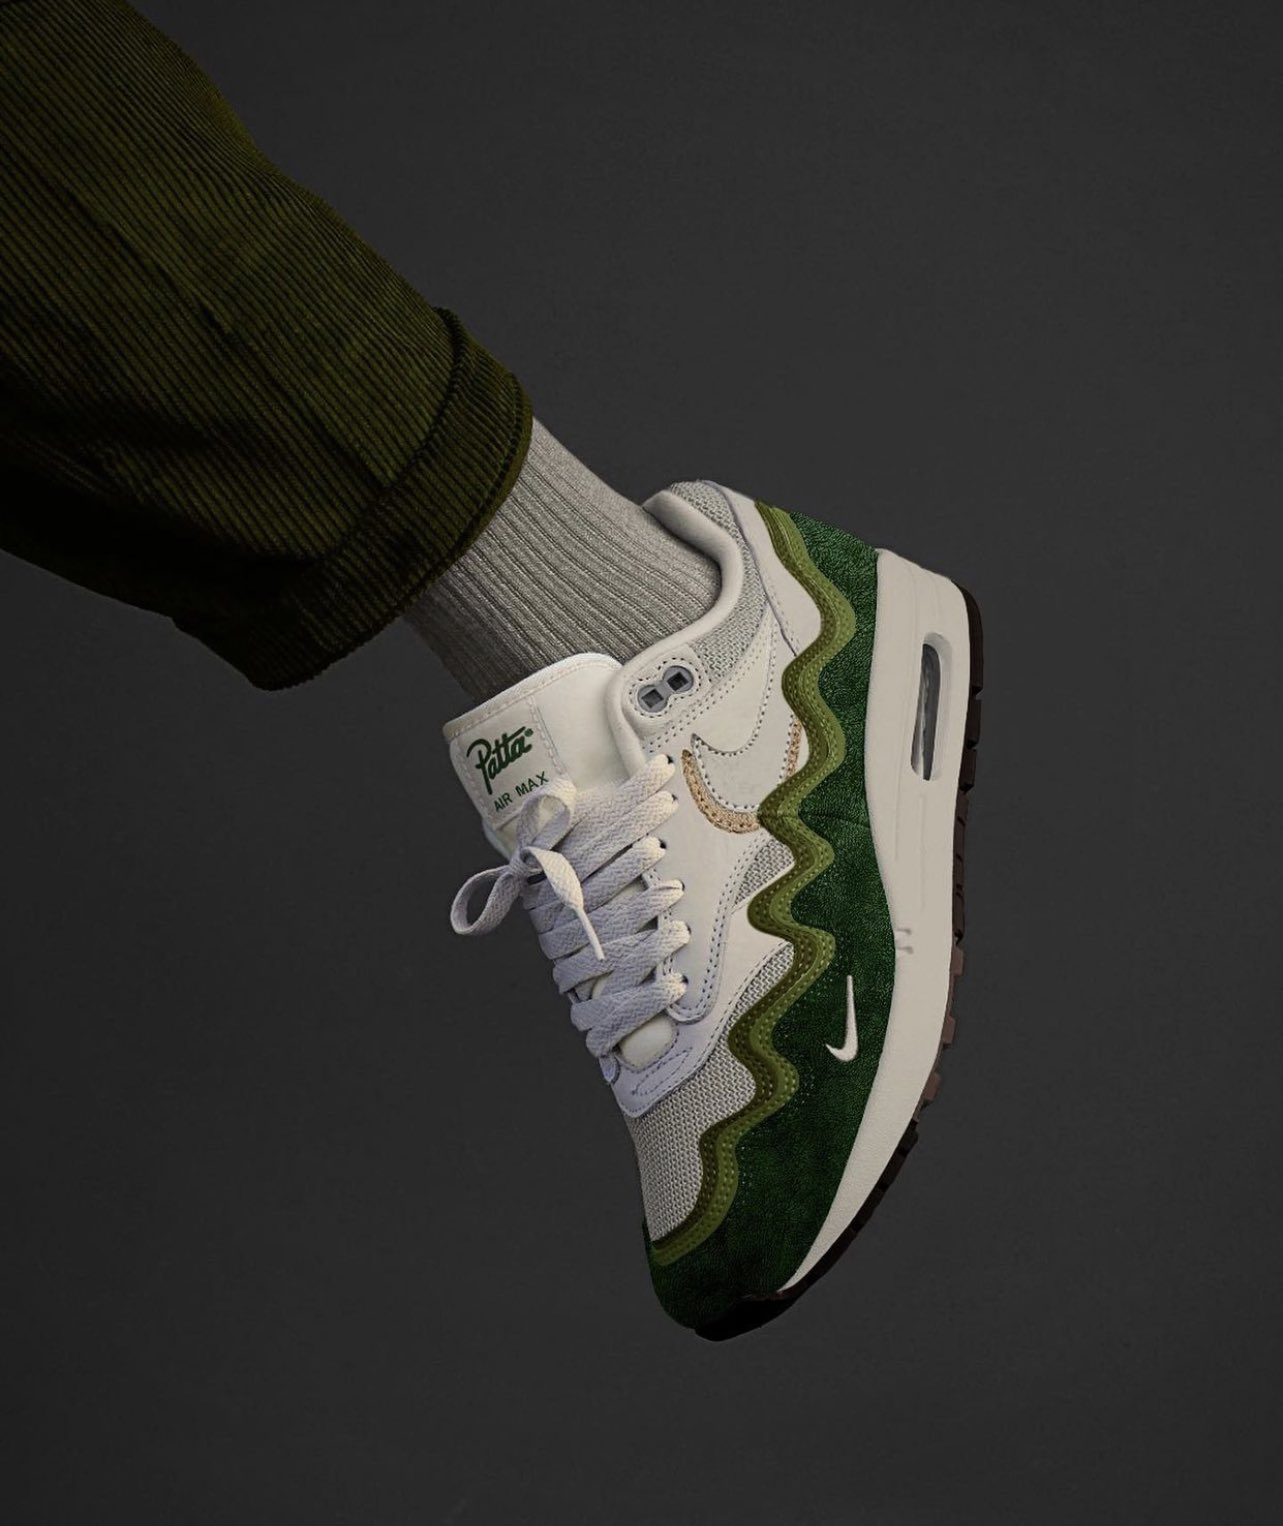 Outlander Magazine on Twitter: "PATTA x Nike Air Max 1 Concept by